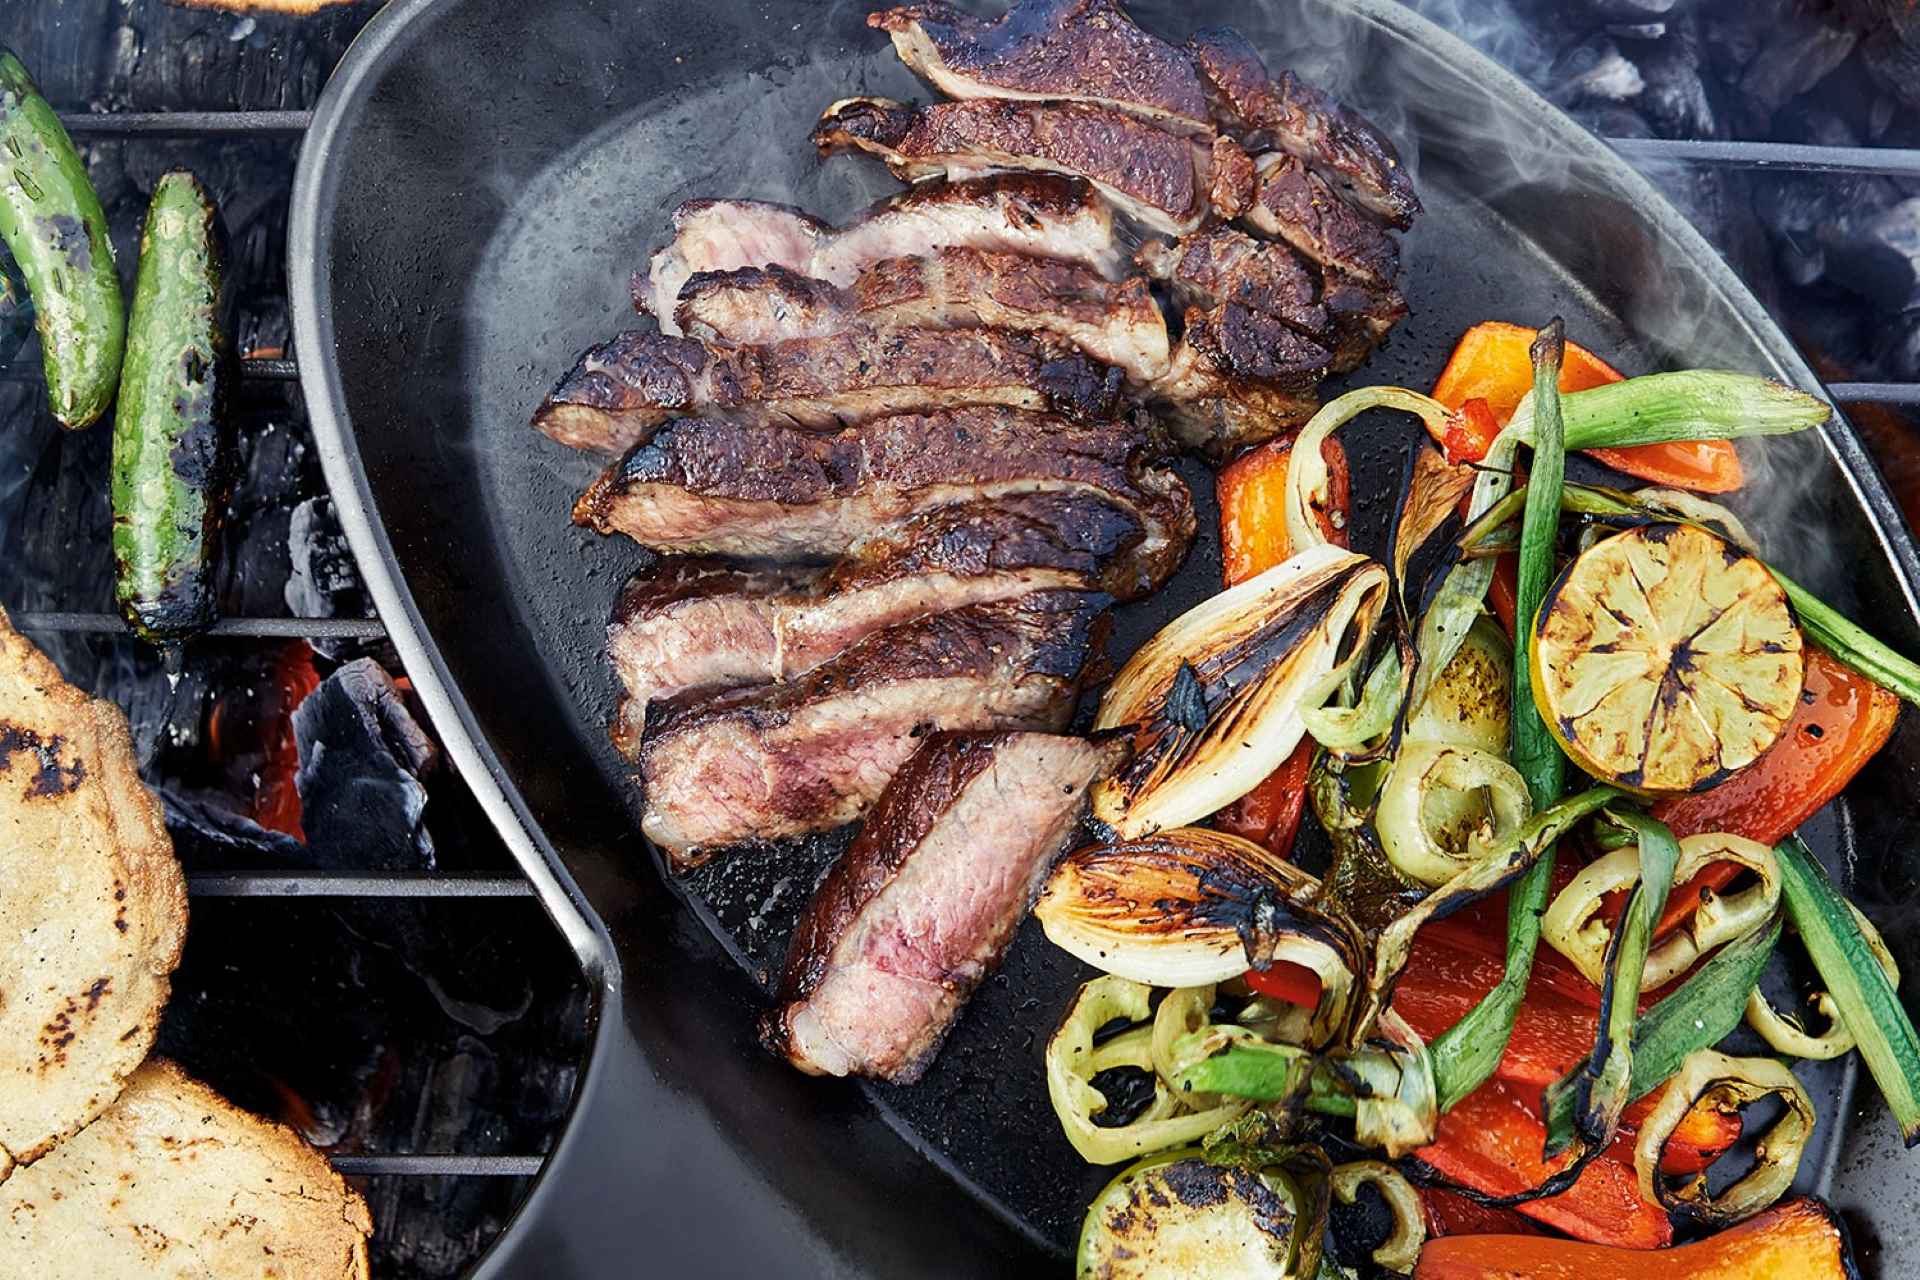 12 Grilling Recipes to Kickstart Your Summer